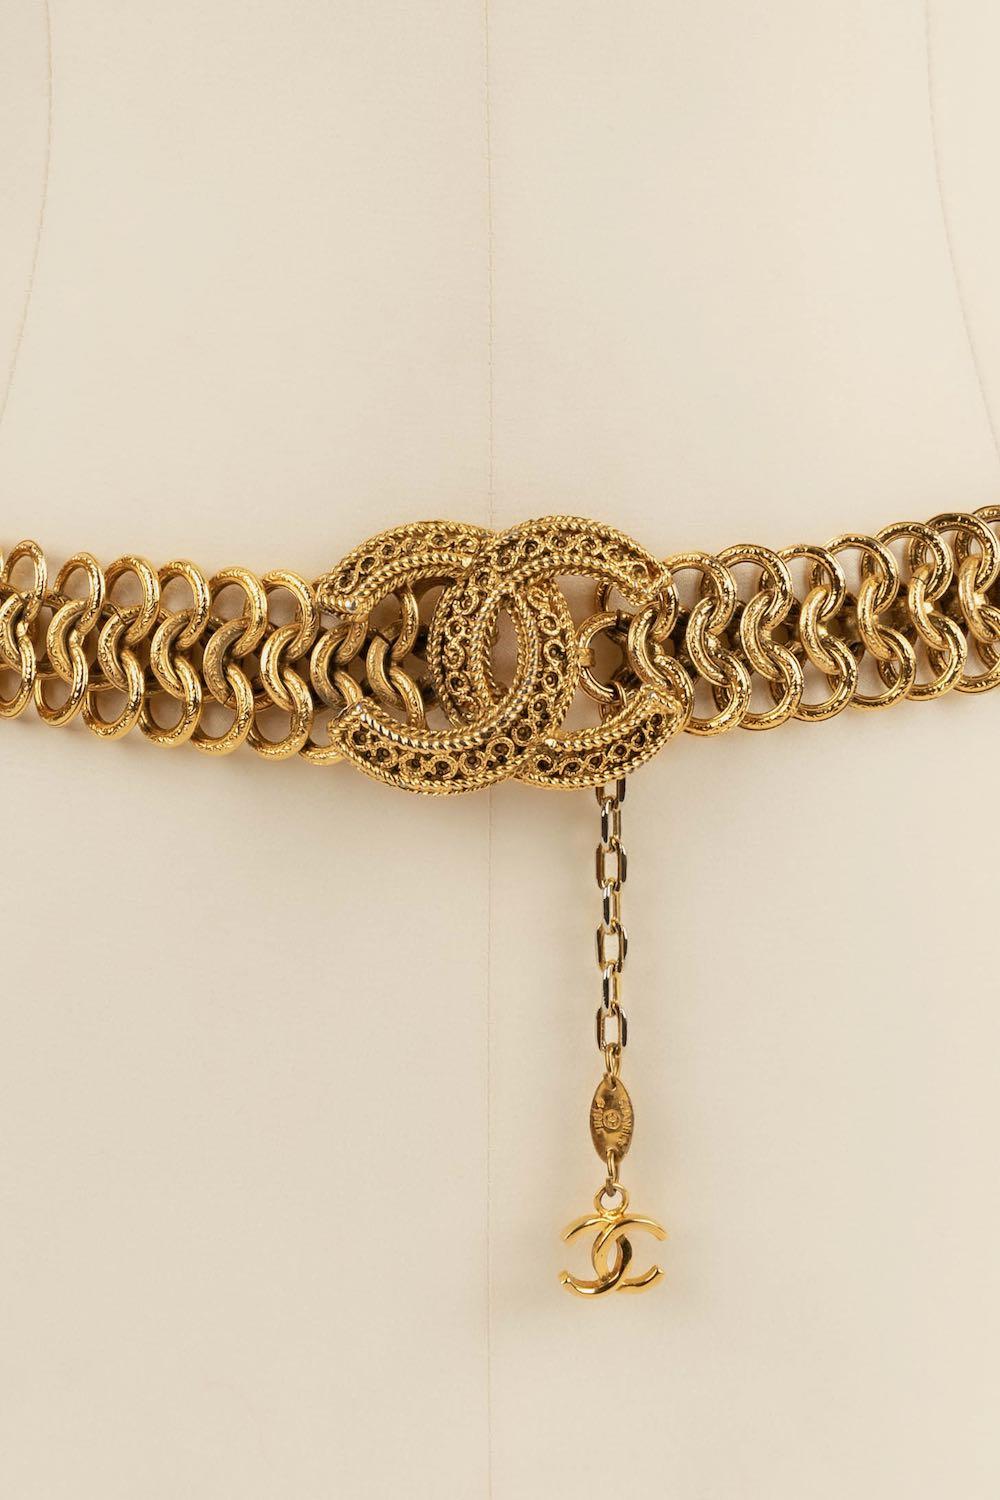 Chanel Belt in Gold Metal and CC Buckle, 1985 5